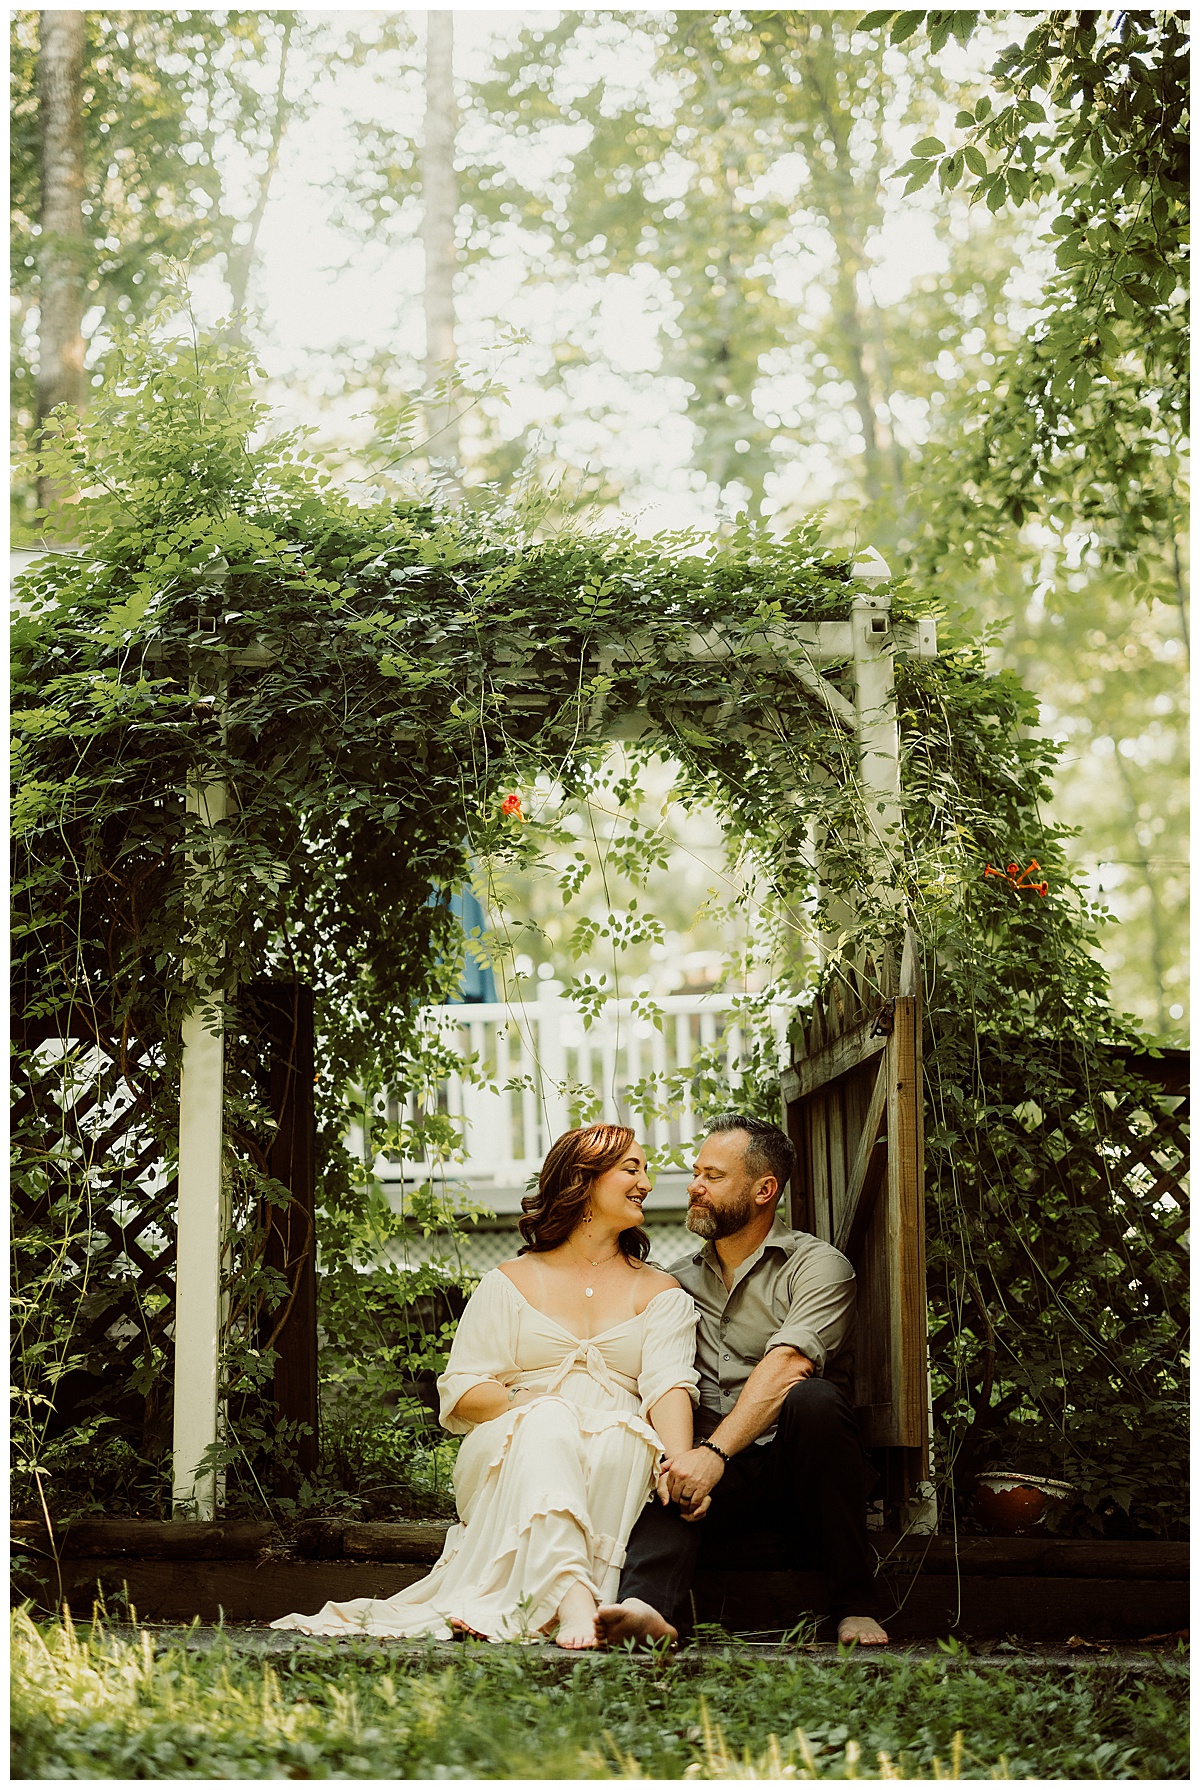 Parents hold each other close during their Magical Backyard Maternity Session